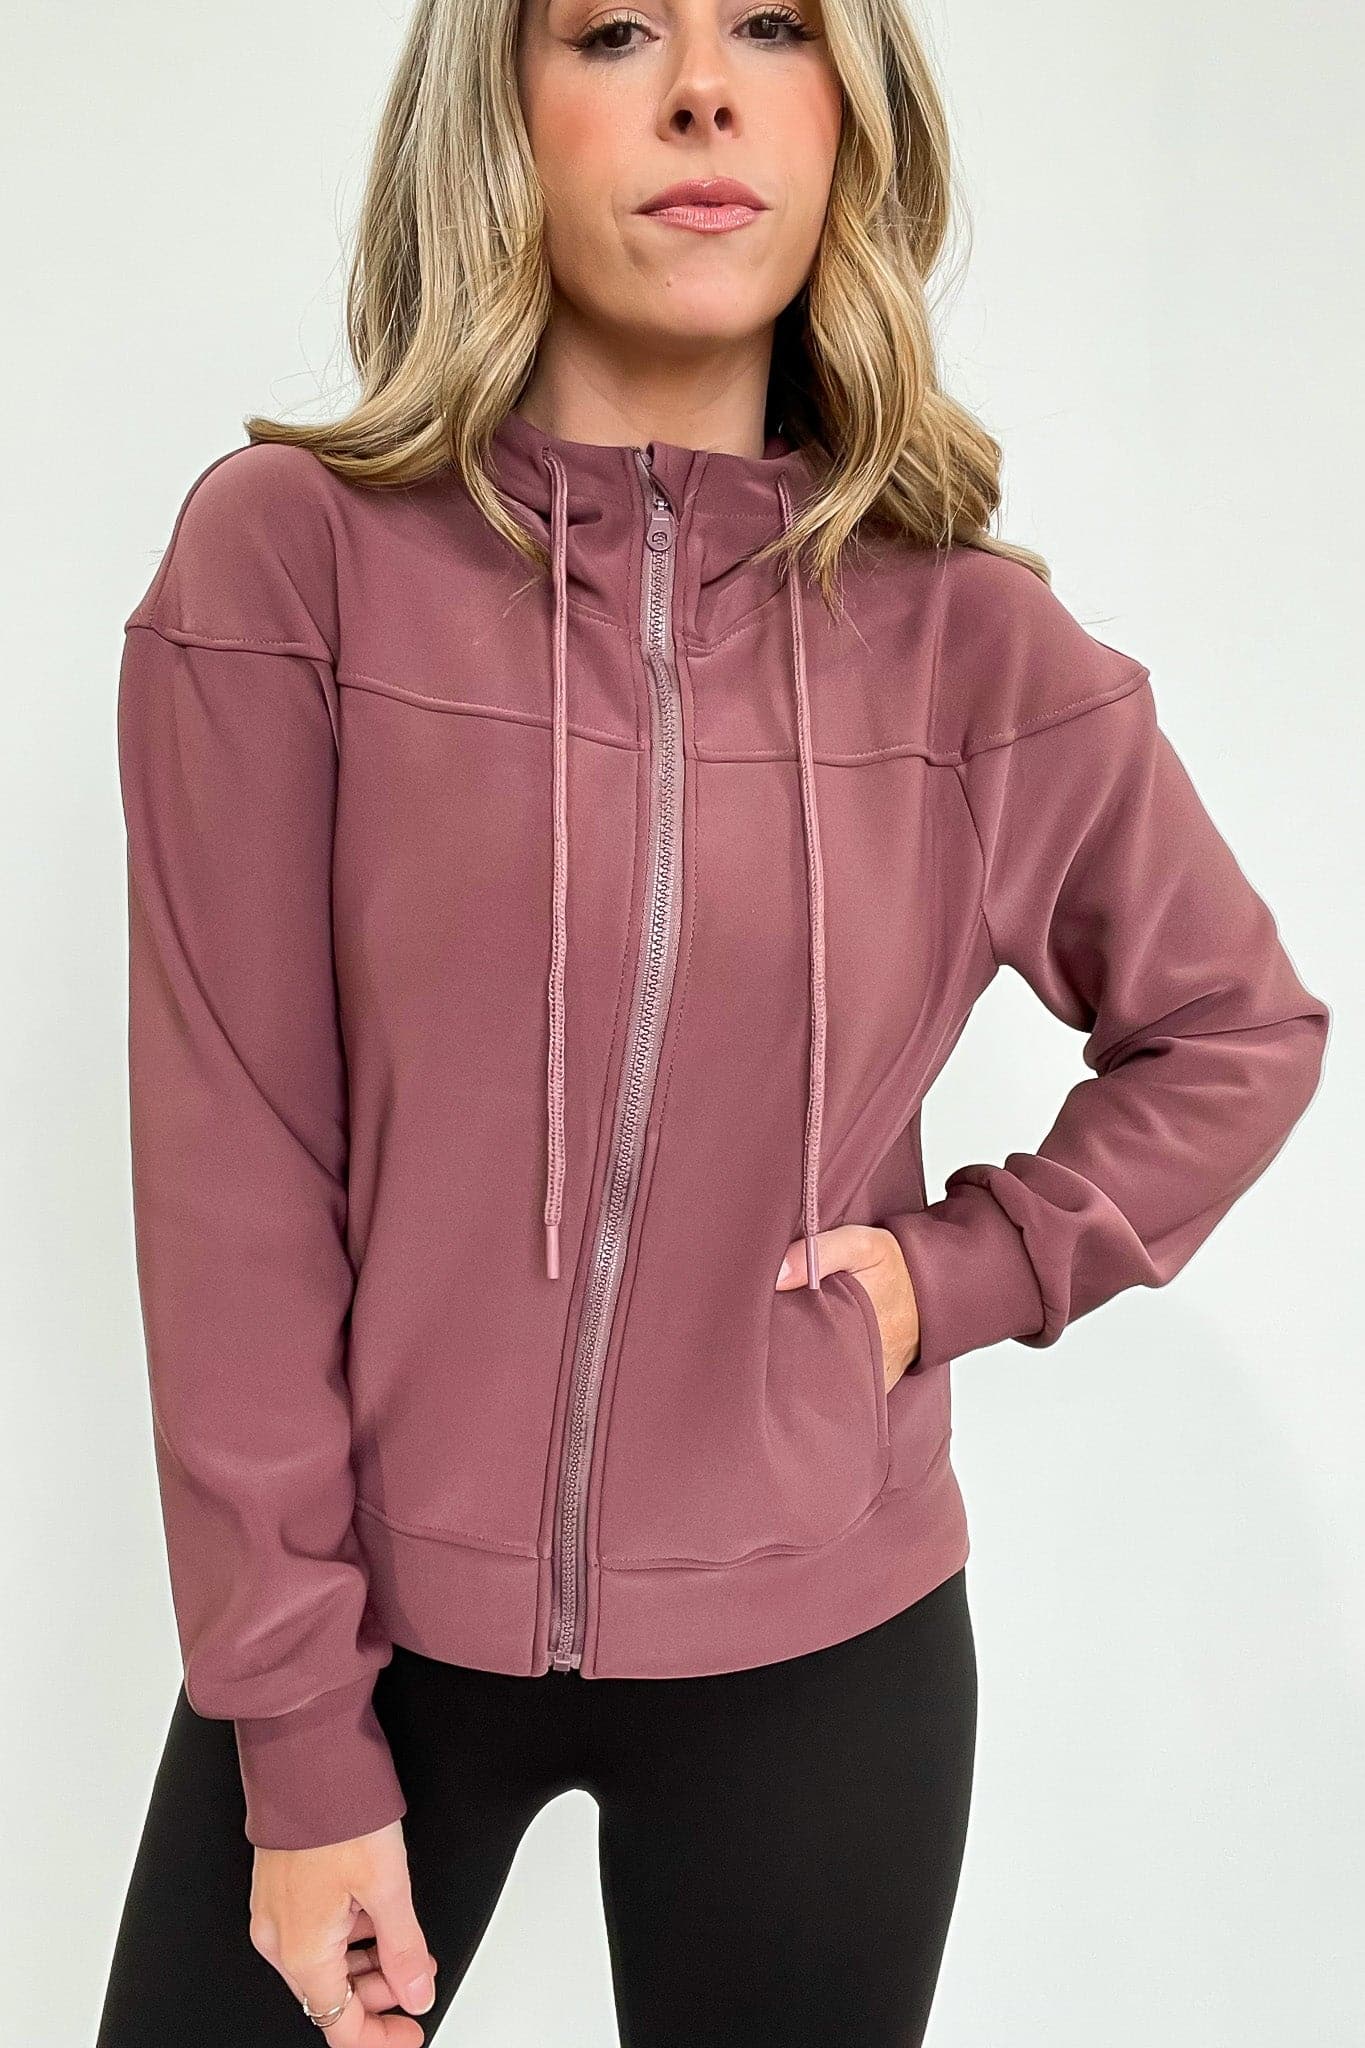  Synoy Scuba Knit Zip Hooded Jacket - Madison and Mallory